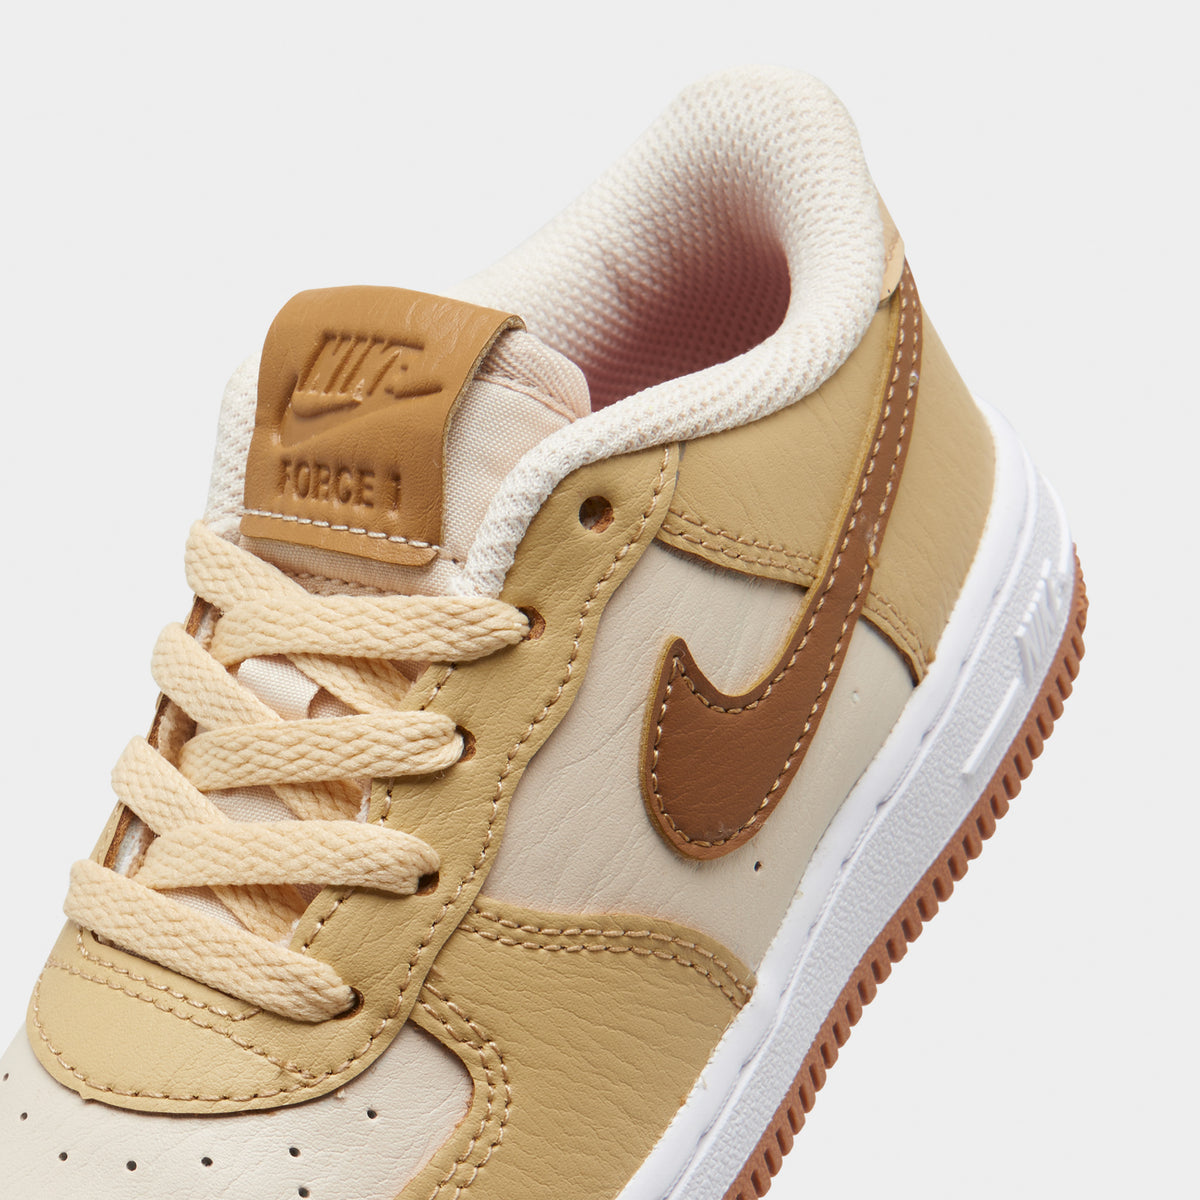 Buy Nike Air Force 1 '07 LV8 Men's Shoes, Pearl White/Ale Brown-sesame, 14  at